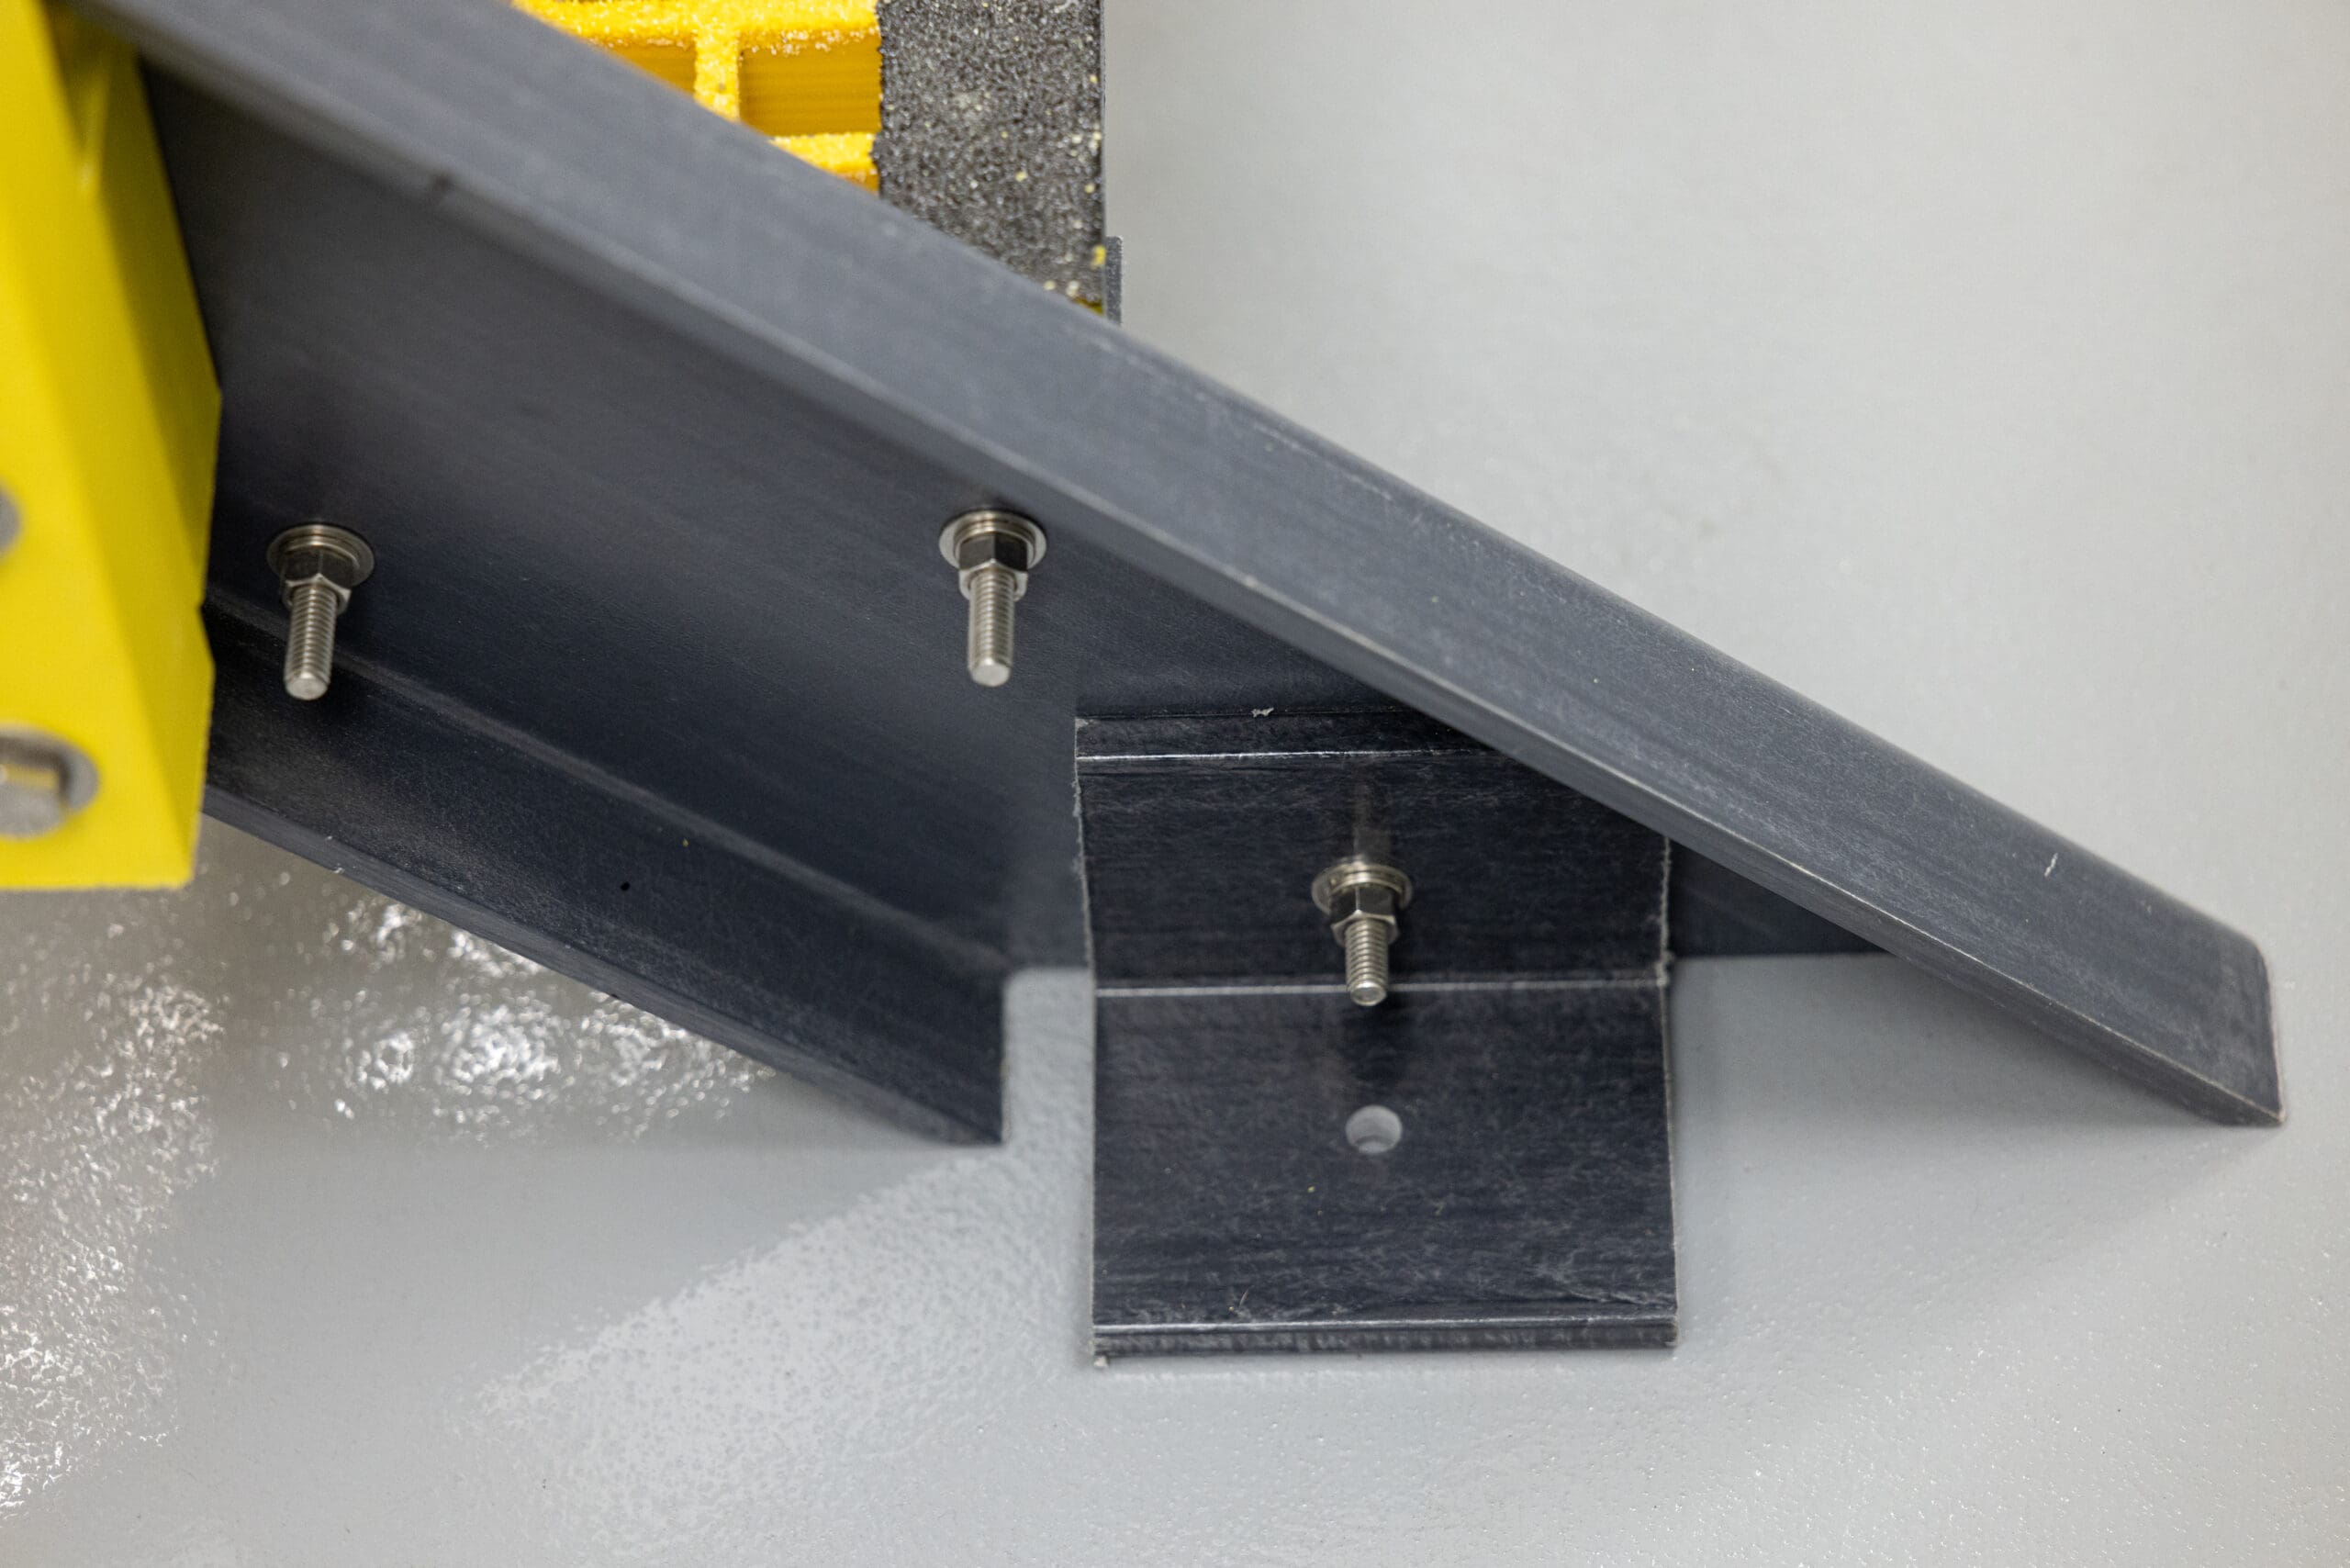 Close-up of yellow ReadyStairs support and connection points